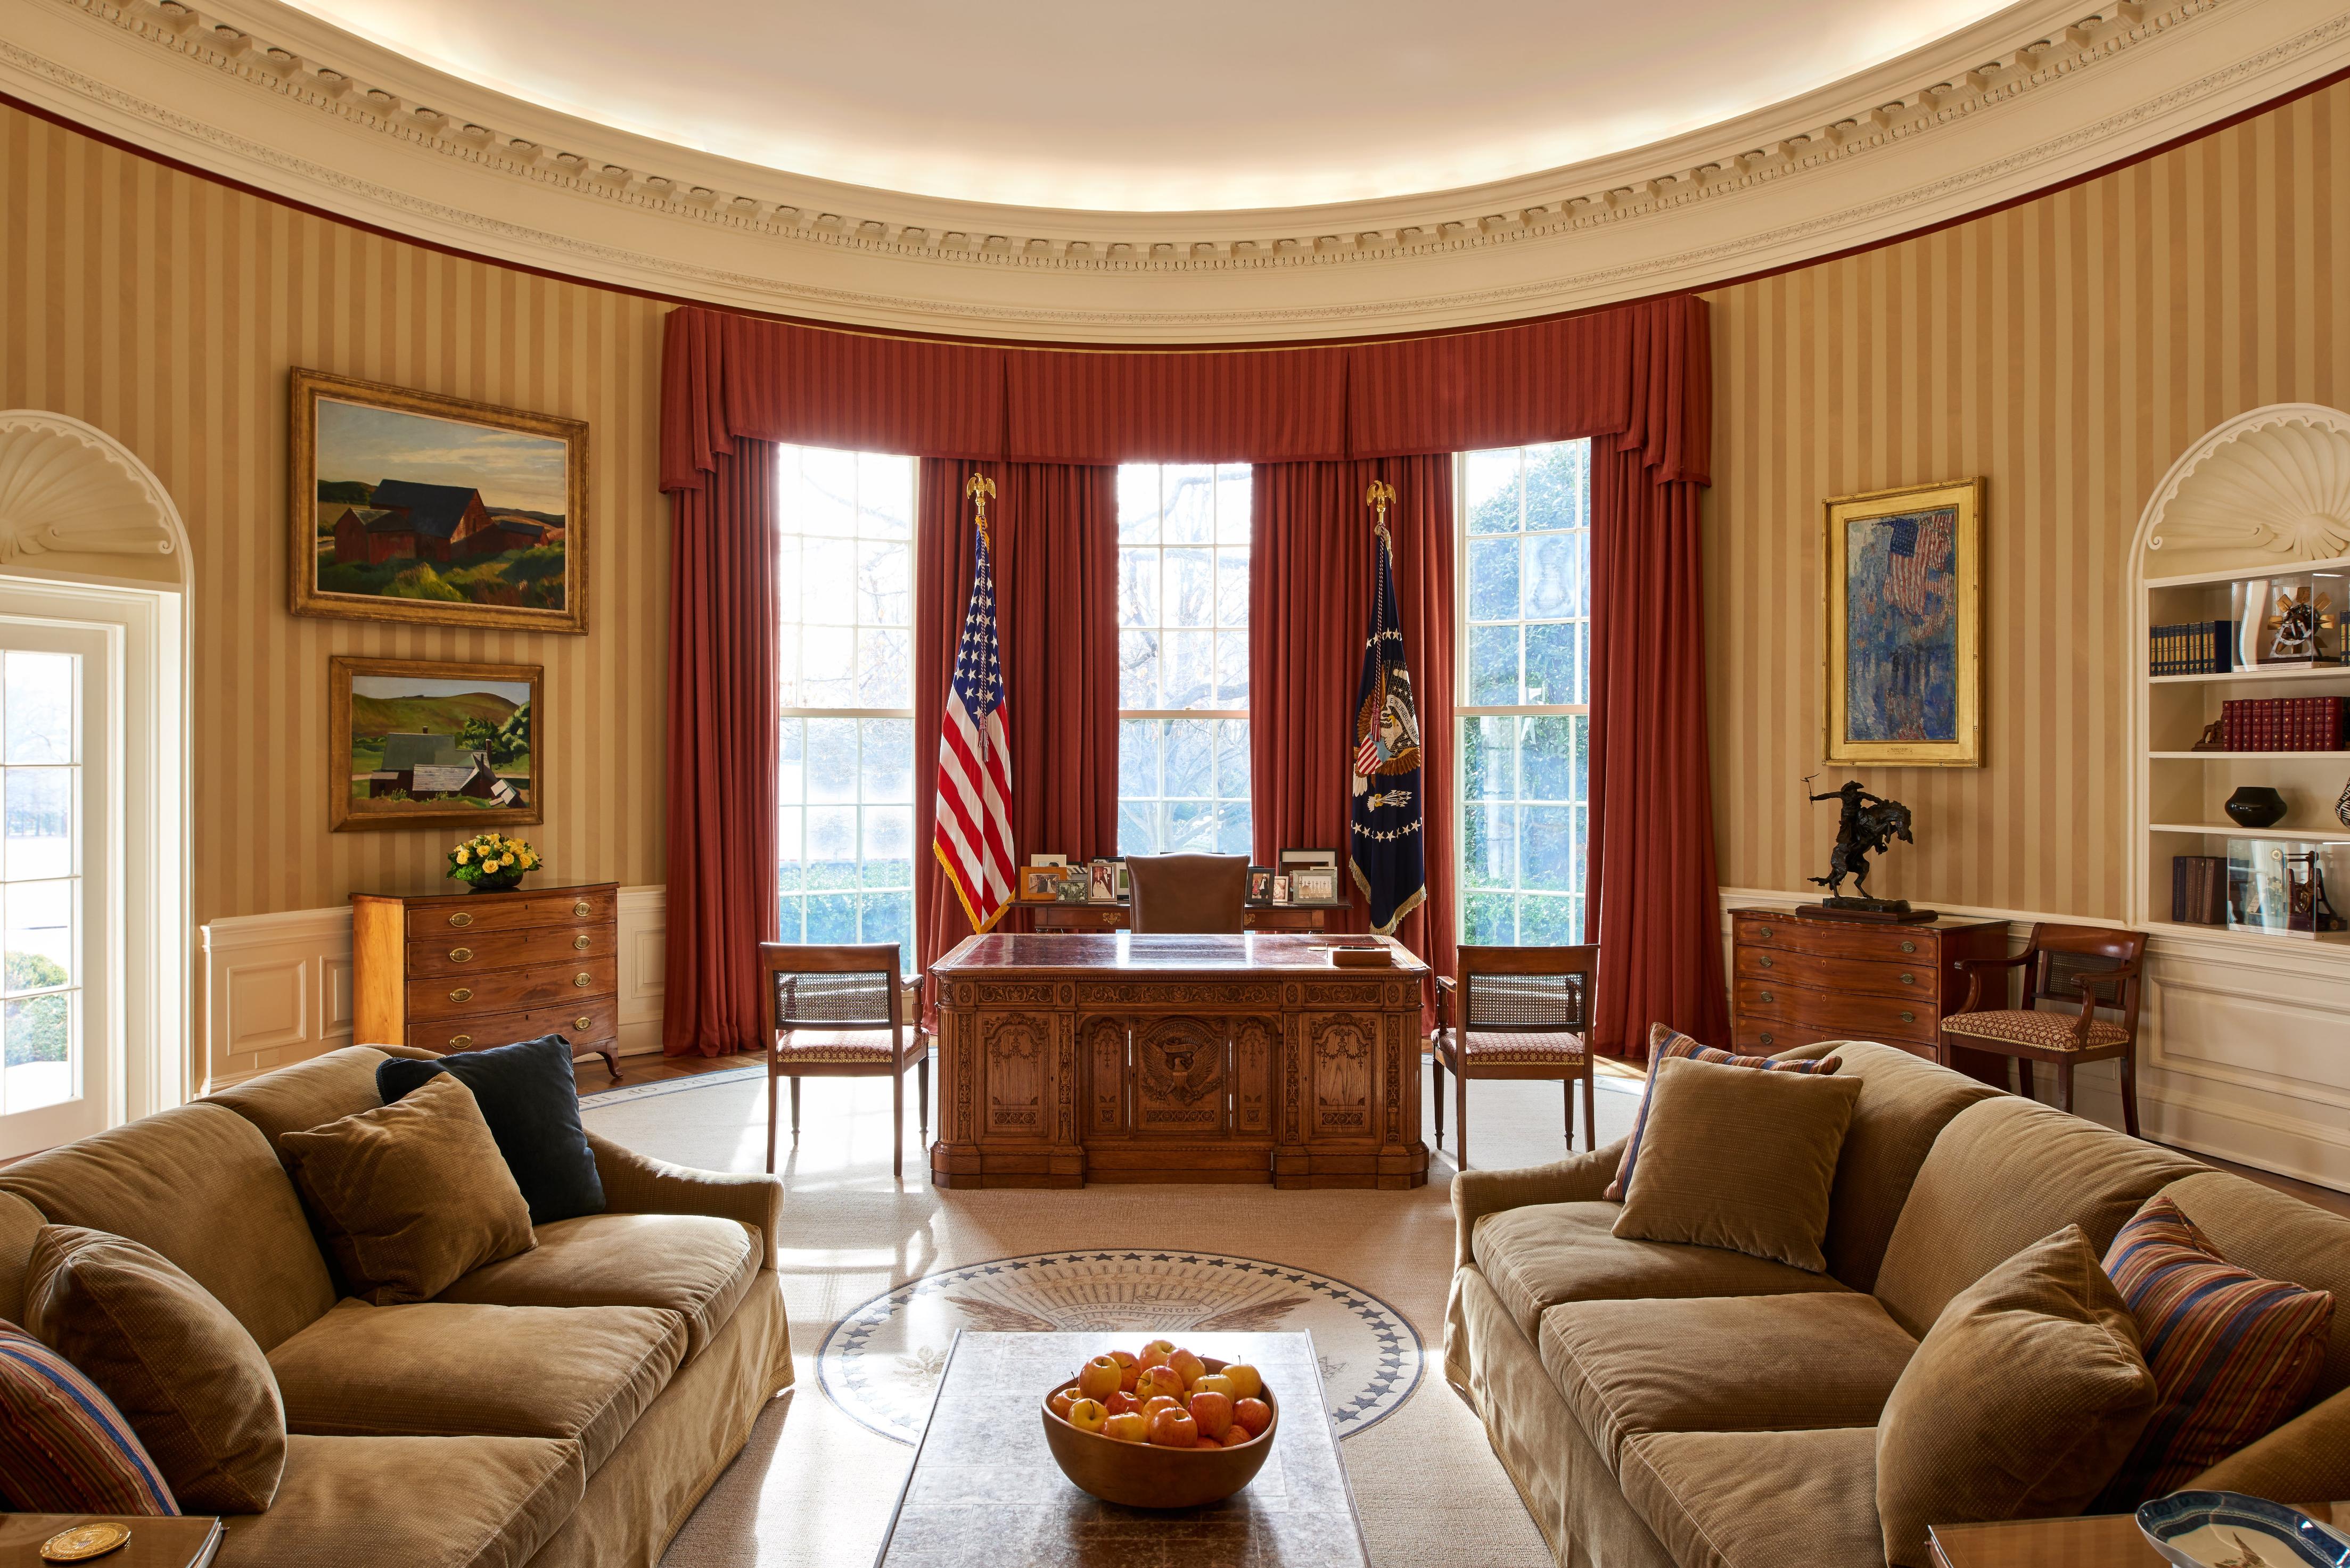 Michael S Smith The Obamas Decorator In Chief Reflects On 8 Years At The White House Cnn Style